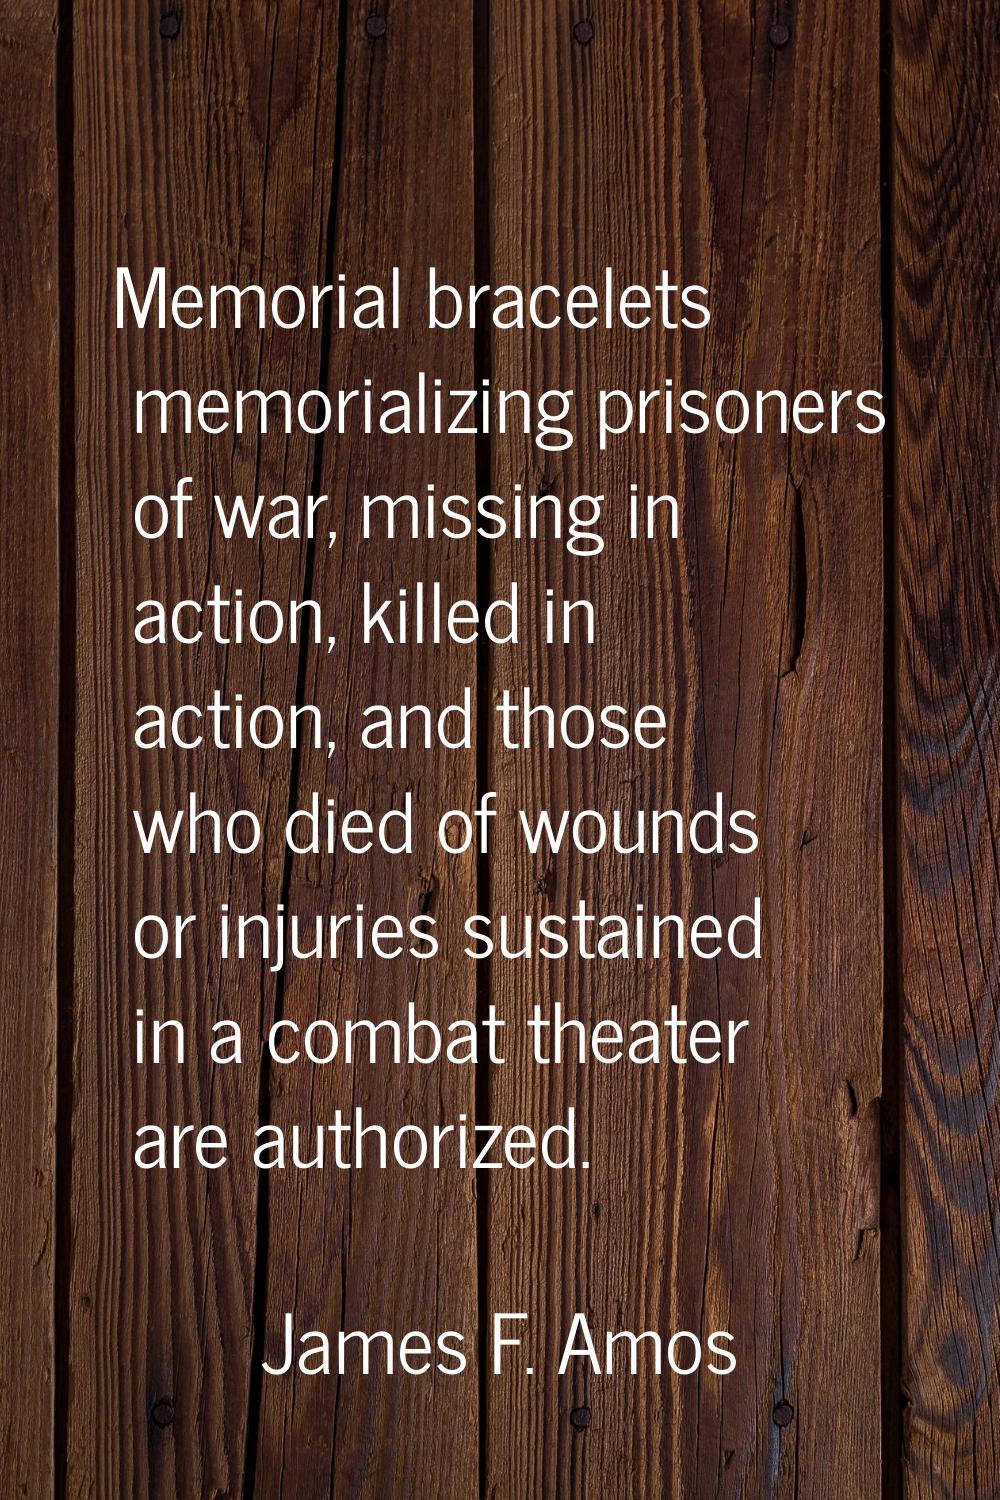 Memorial bracelets memorializing prisoners of war, missing in action, killed in action, and those w